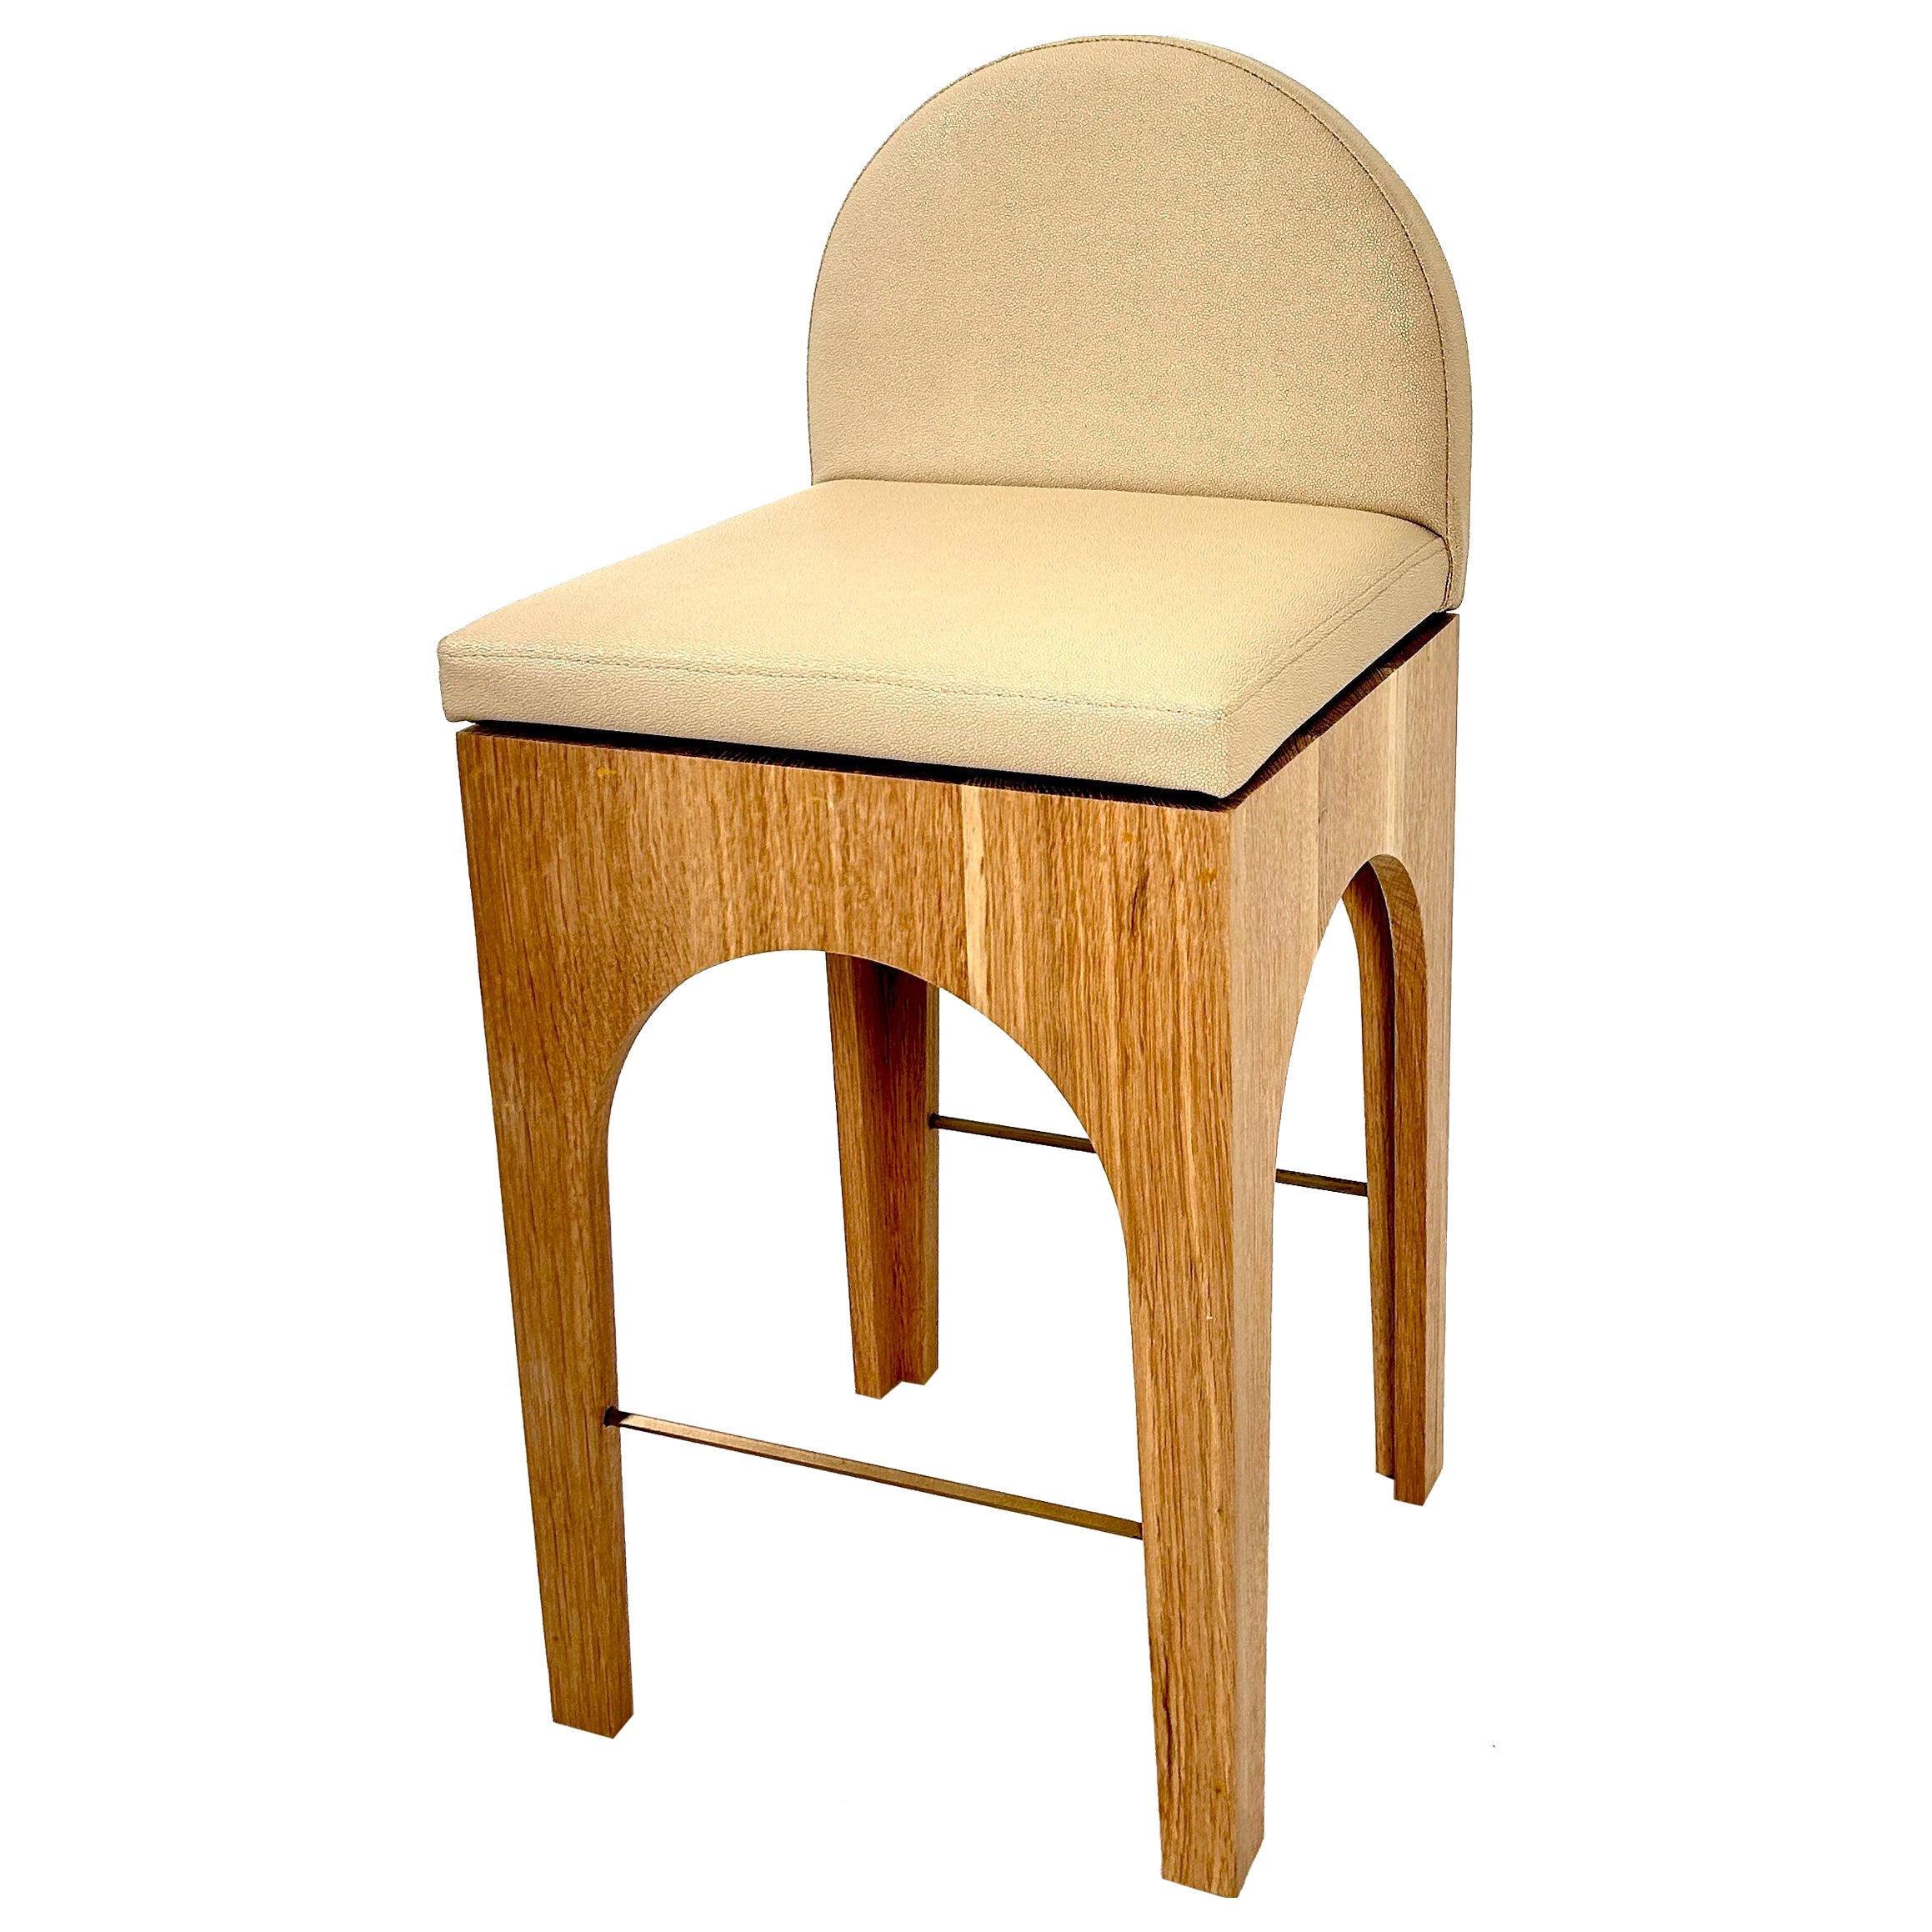 Hand-Crafted 21st Century Minimalist Rift Sawn White Oak Swivel Counter Stool  For Sale